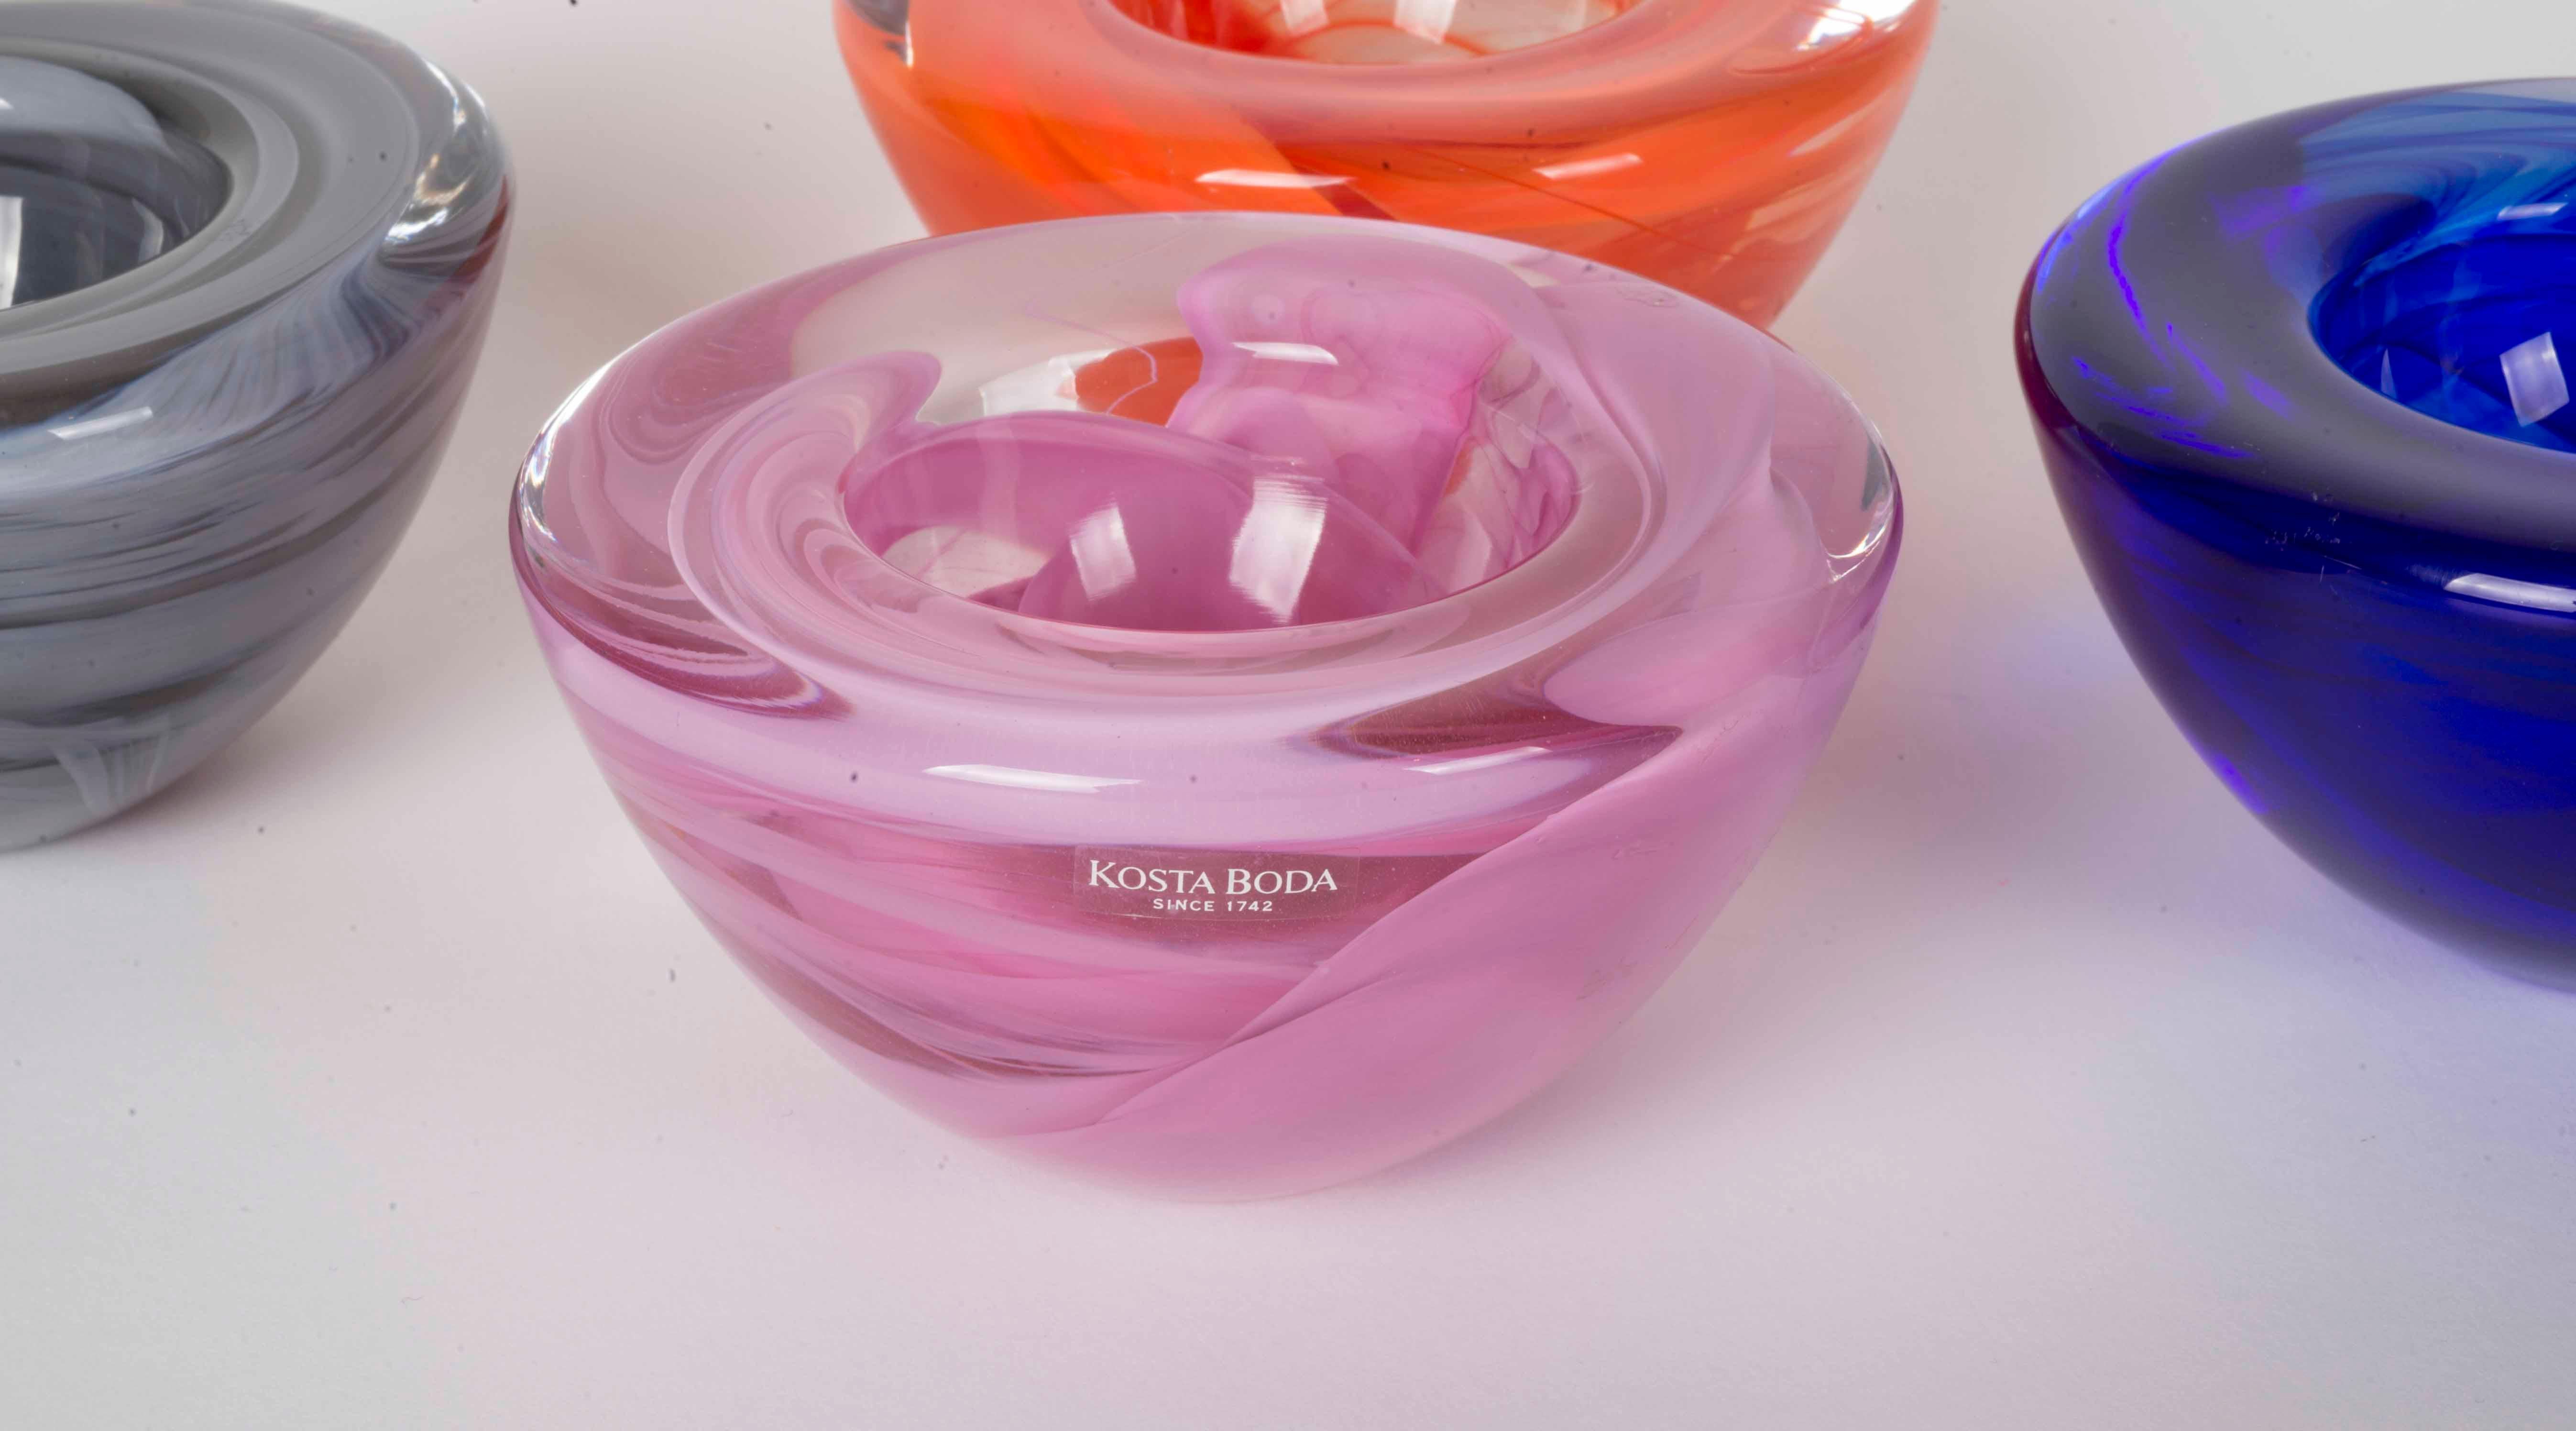 4 Kosta Boda bowls in different colors, orange, pink, blue and grey.